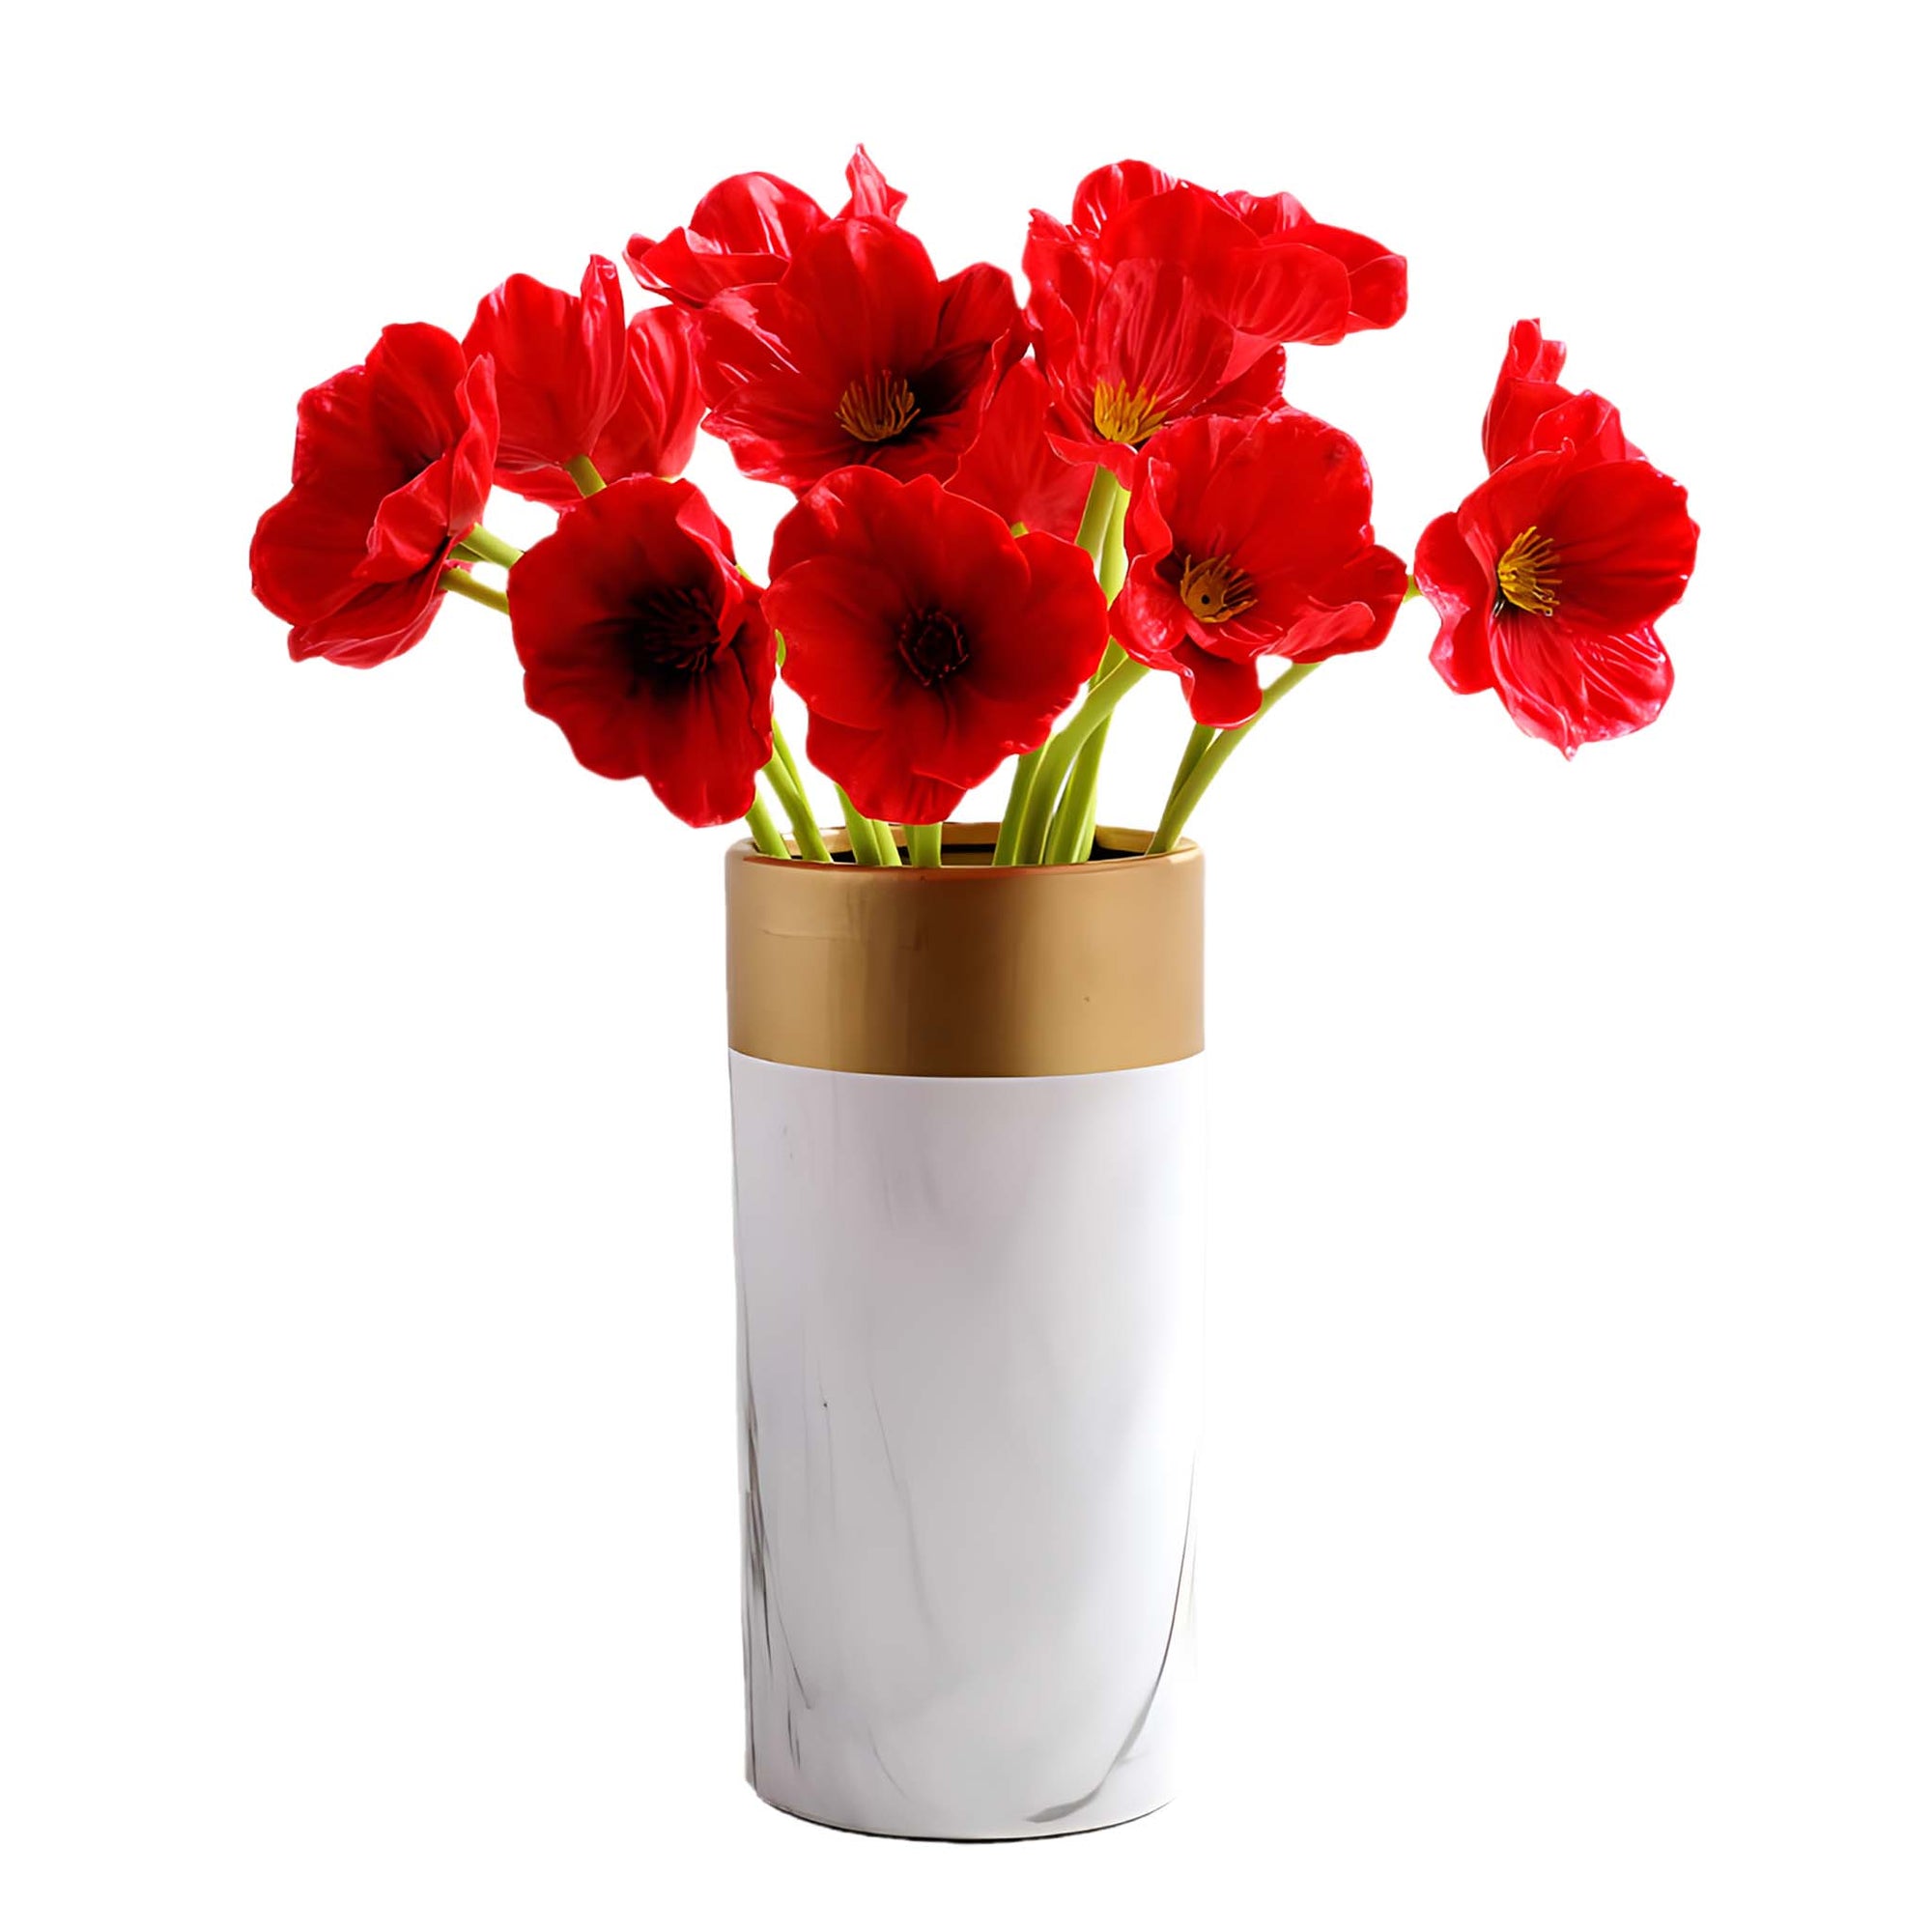 Real Touch Flowers PU Poppy Anemones 10 Blooms